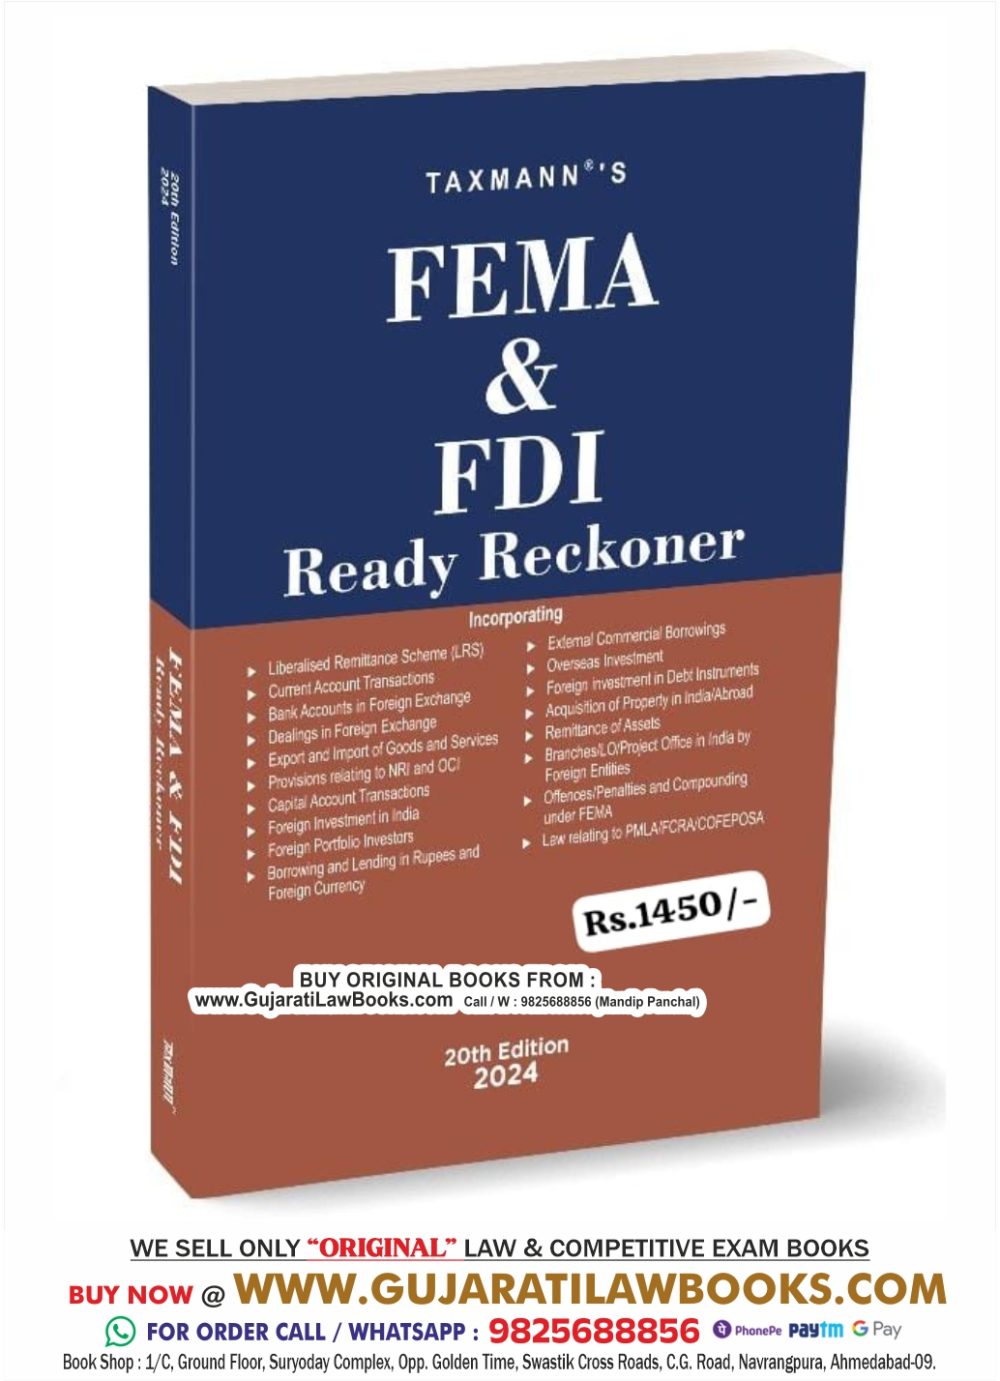 Taxmann's FEMA & FDI Ready Reckoner – Topic-wise commentary on 50+ topics (including LRS, IFSC, etc.) along with relevant Rules, Case Laws, Circulars, Master Directions, etc. [2024]